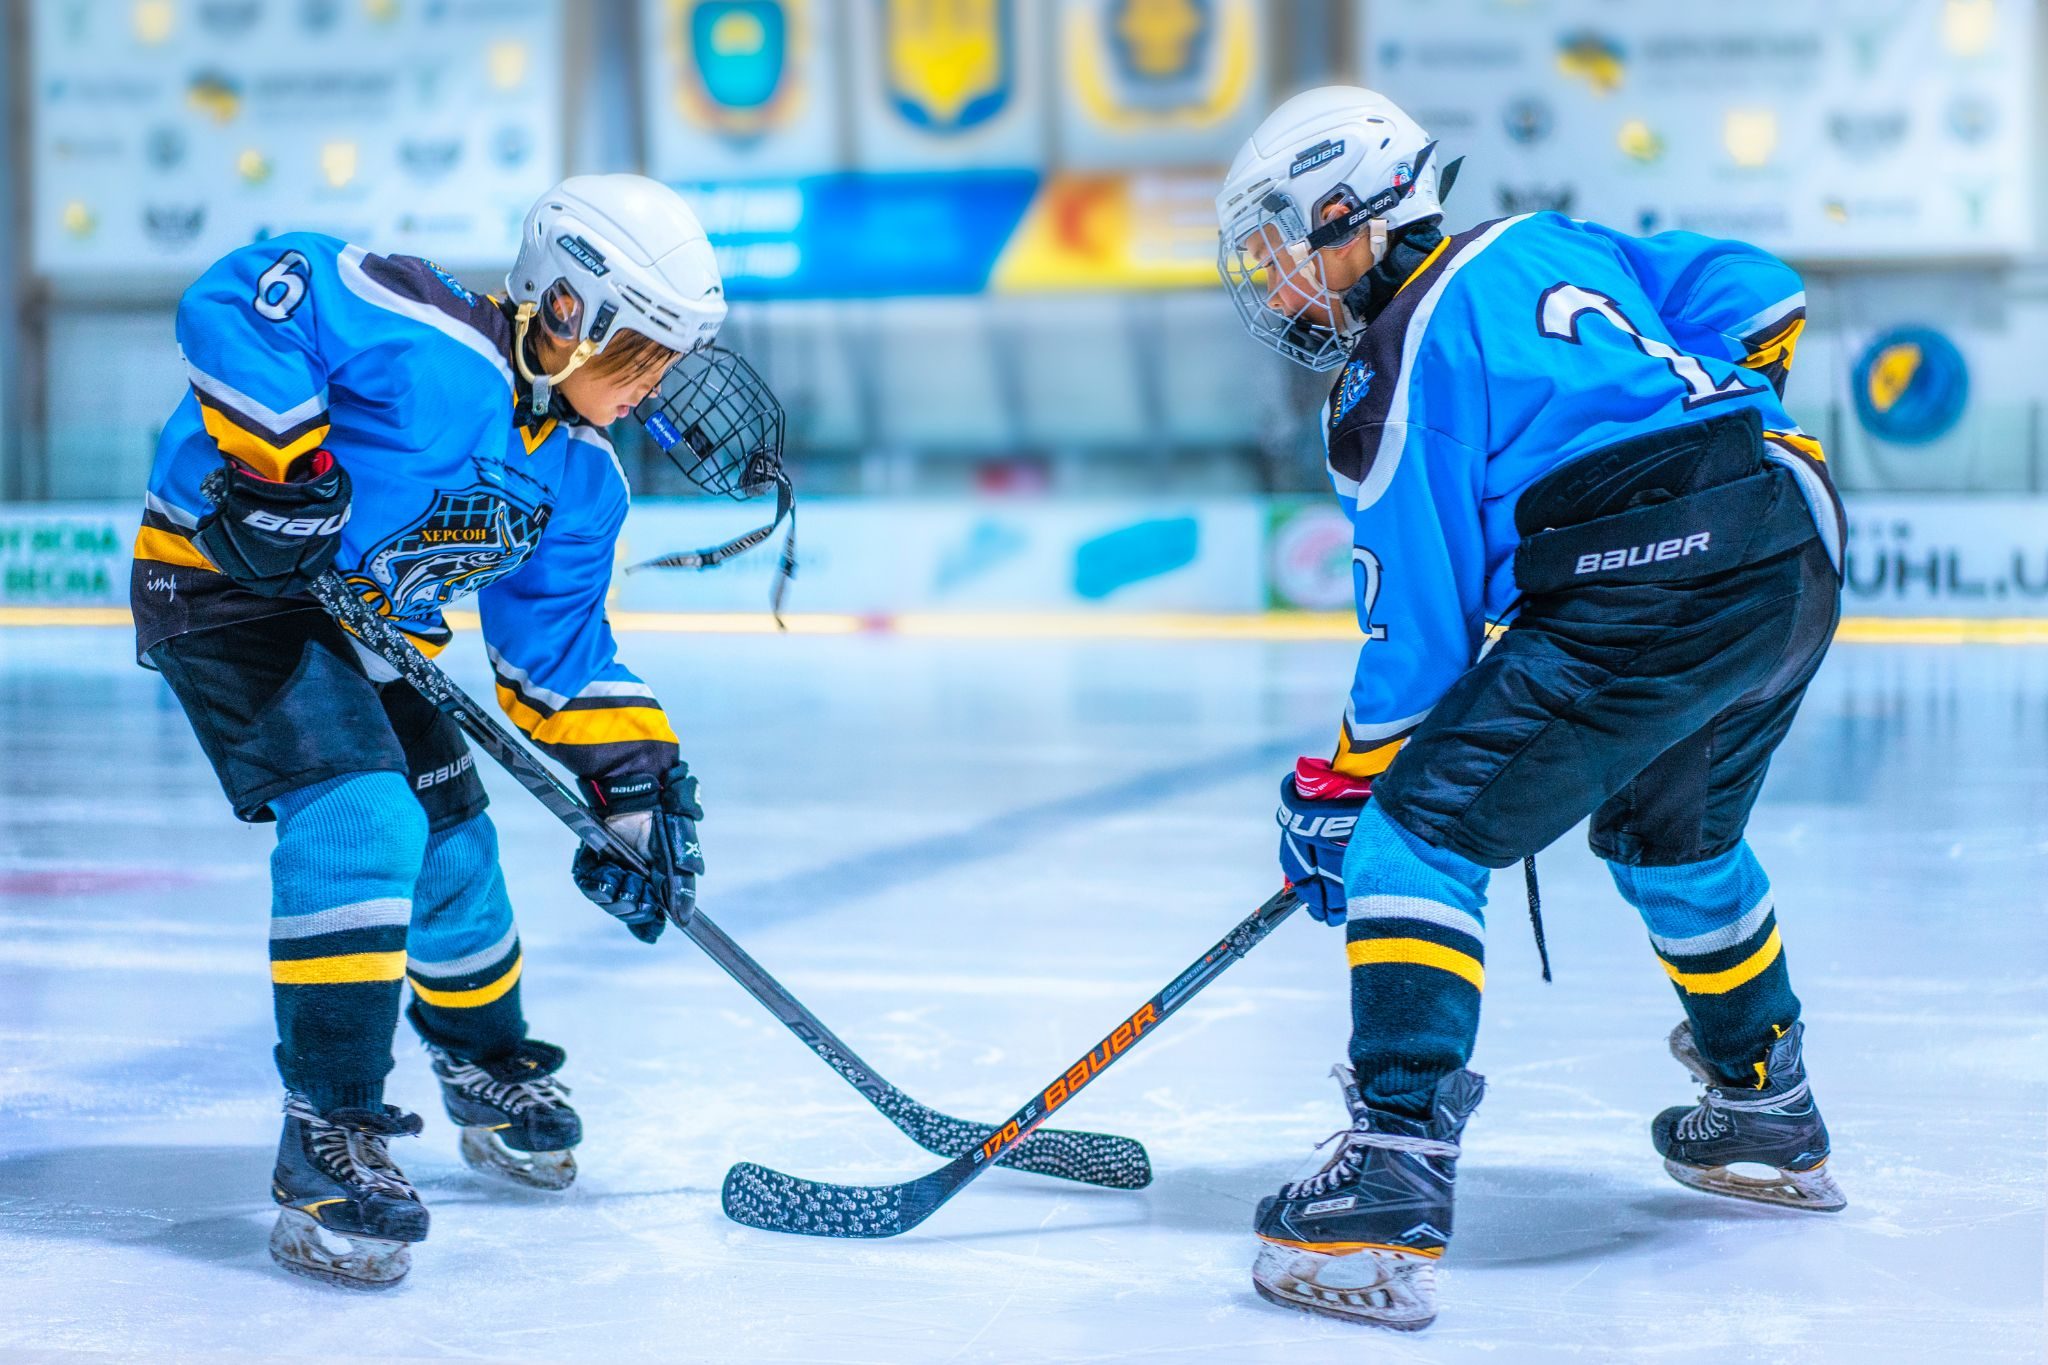 Two ice hockey players on an ice rink